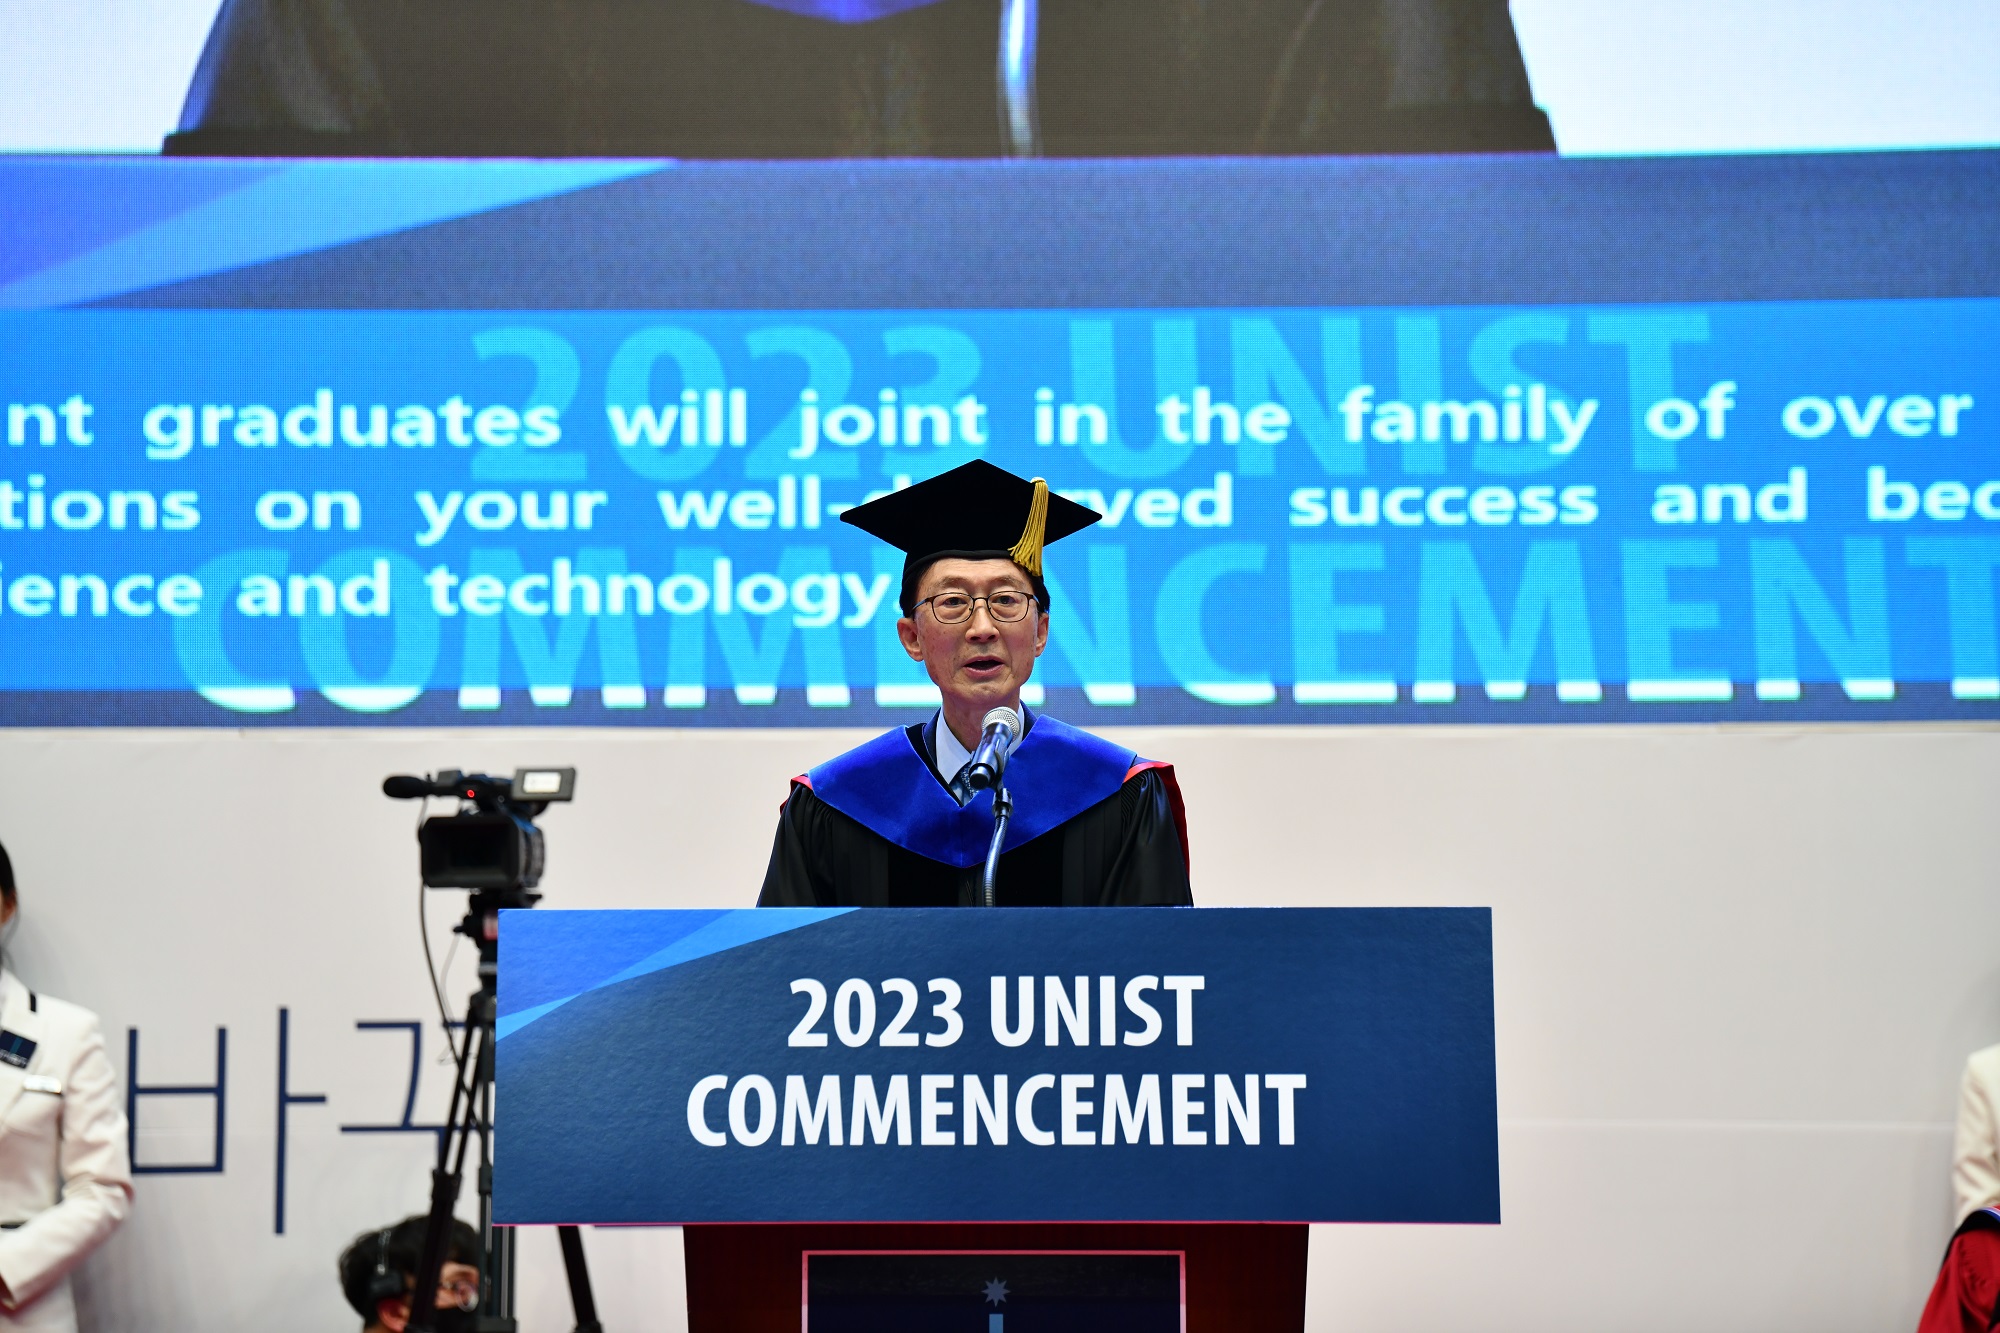 President Yong Hoon Lee gives his commencement address at the 2023 UNIST Commencement Ceremony, held on Thursday, February 16, 2023.